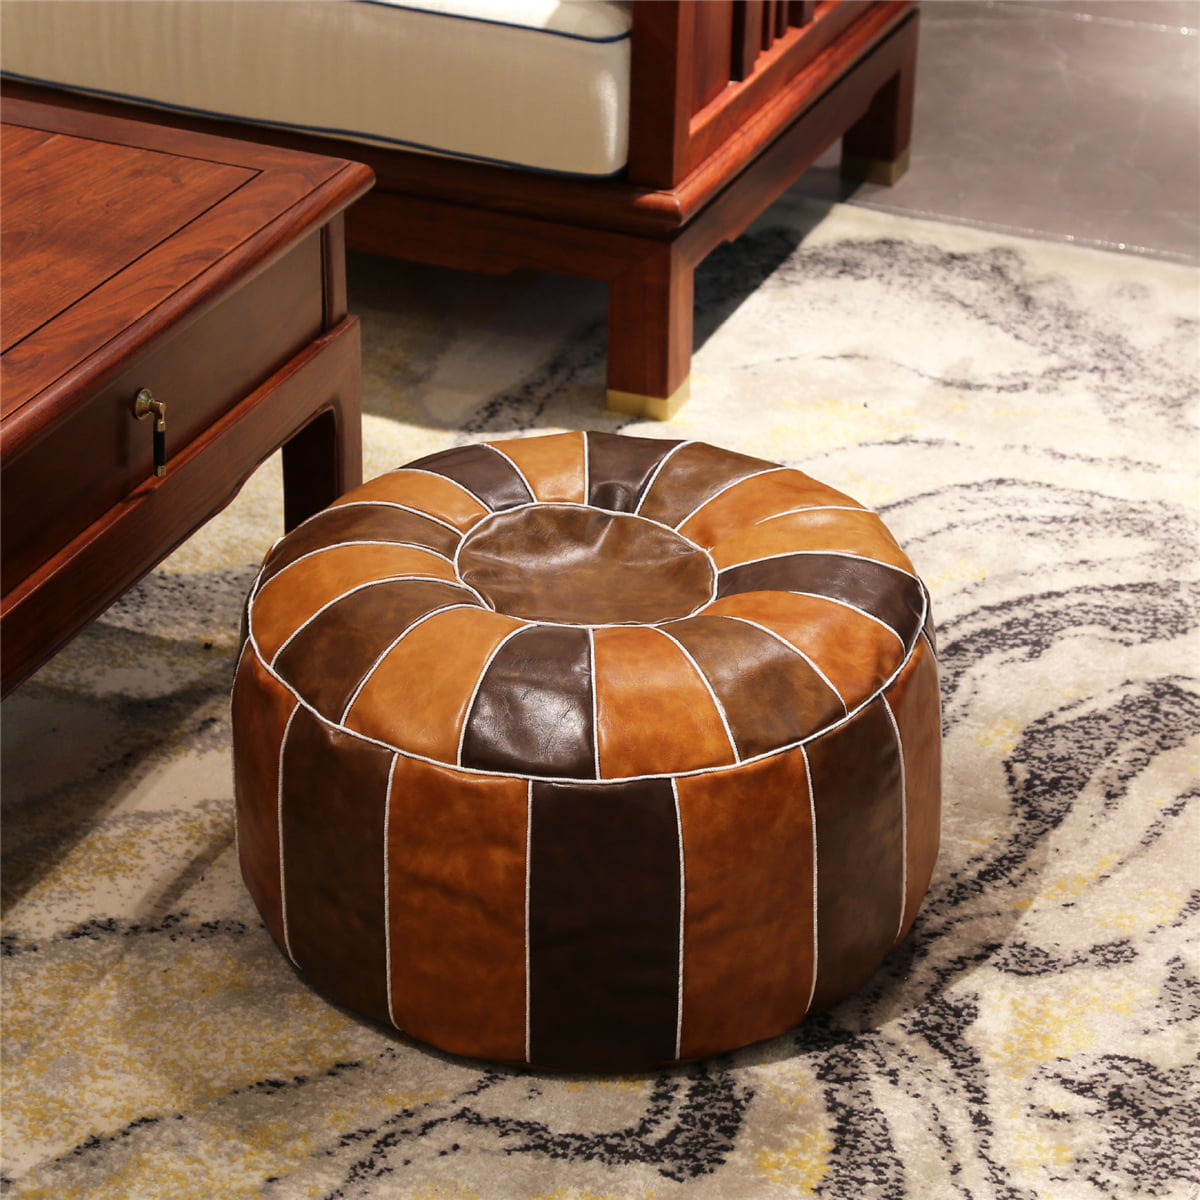 Moroccan Leather Pouf Handmade, Light Brown Leather Ottoman